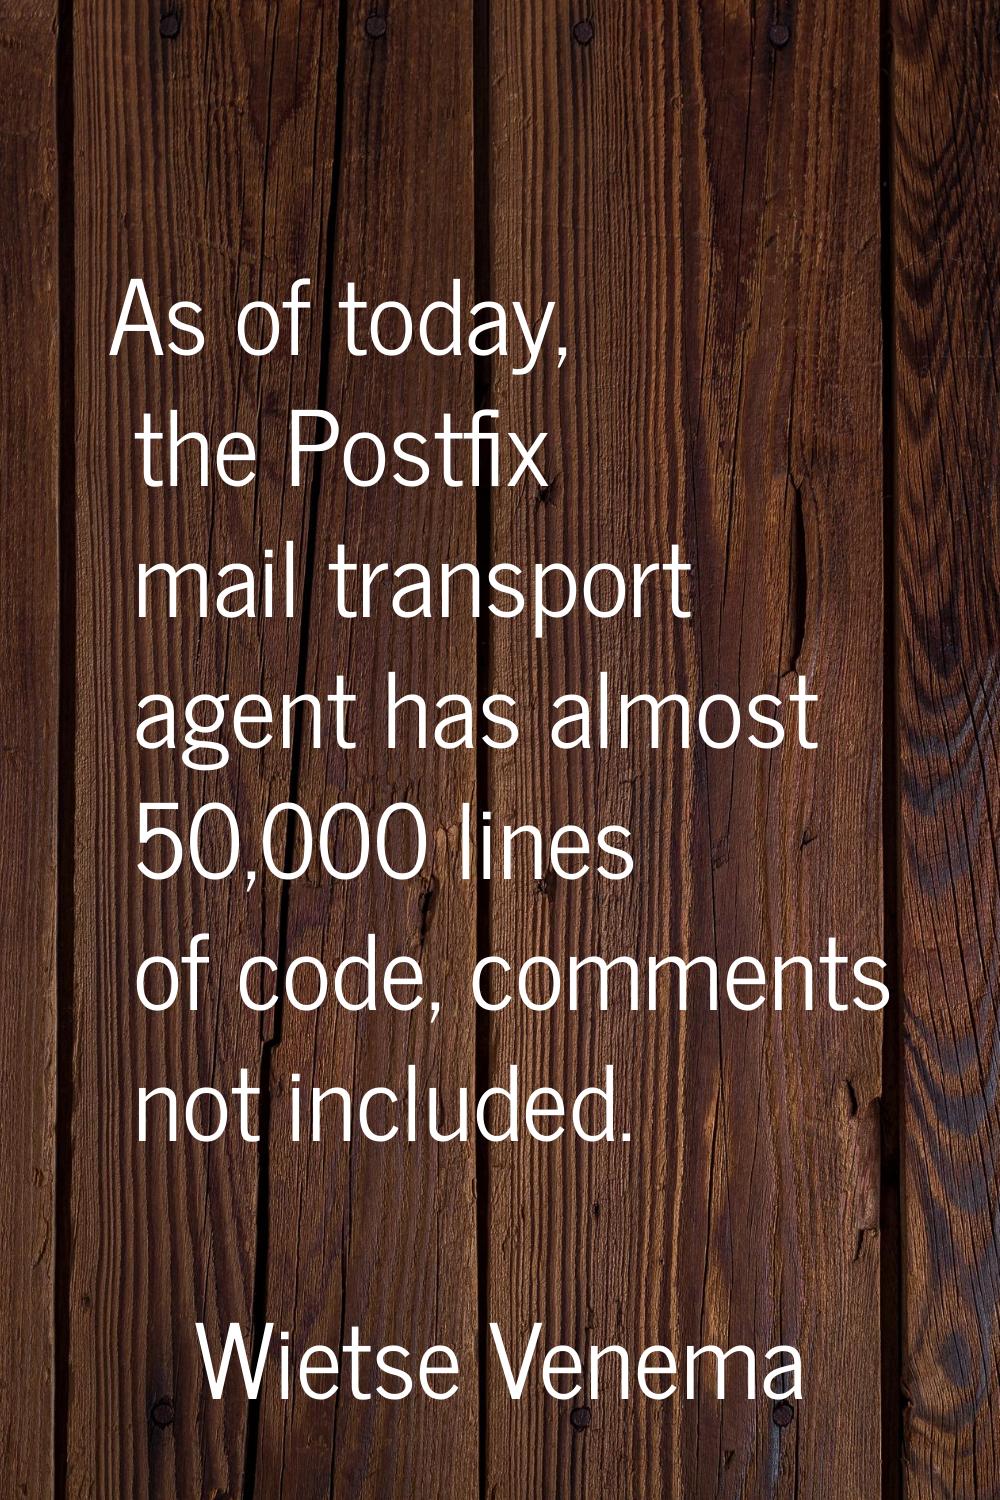 As of today, the Postfix mail transport agent has almost 50,000 lines of code, comments not include